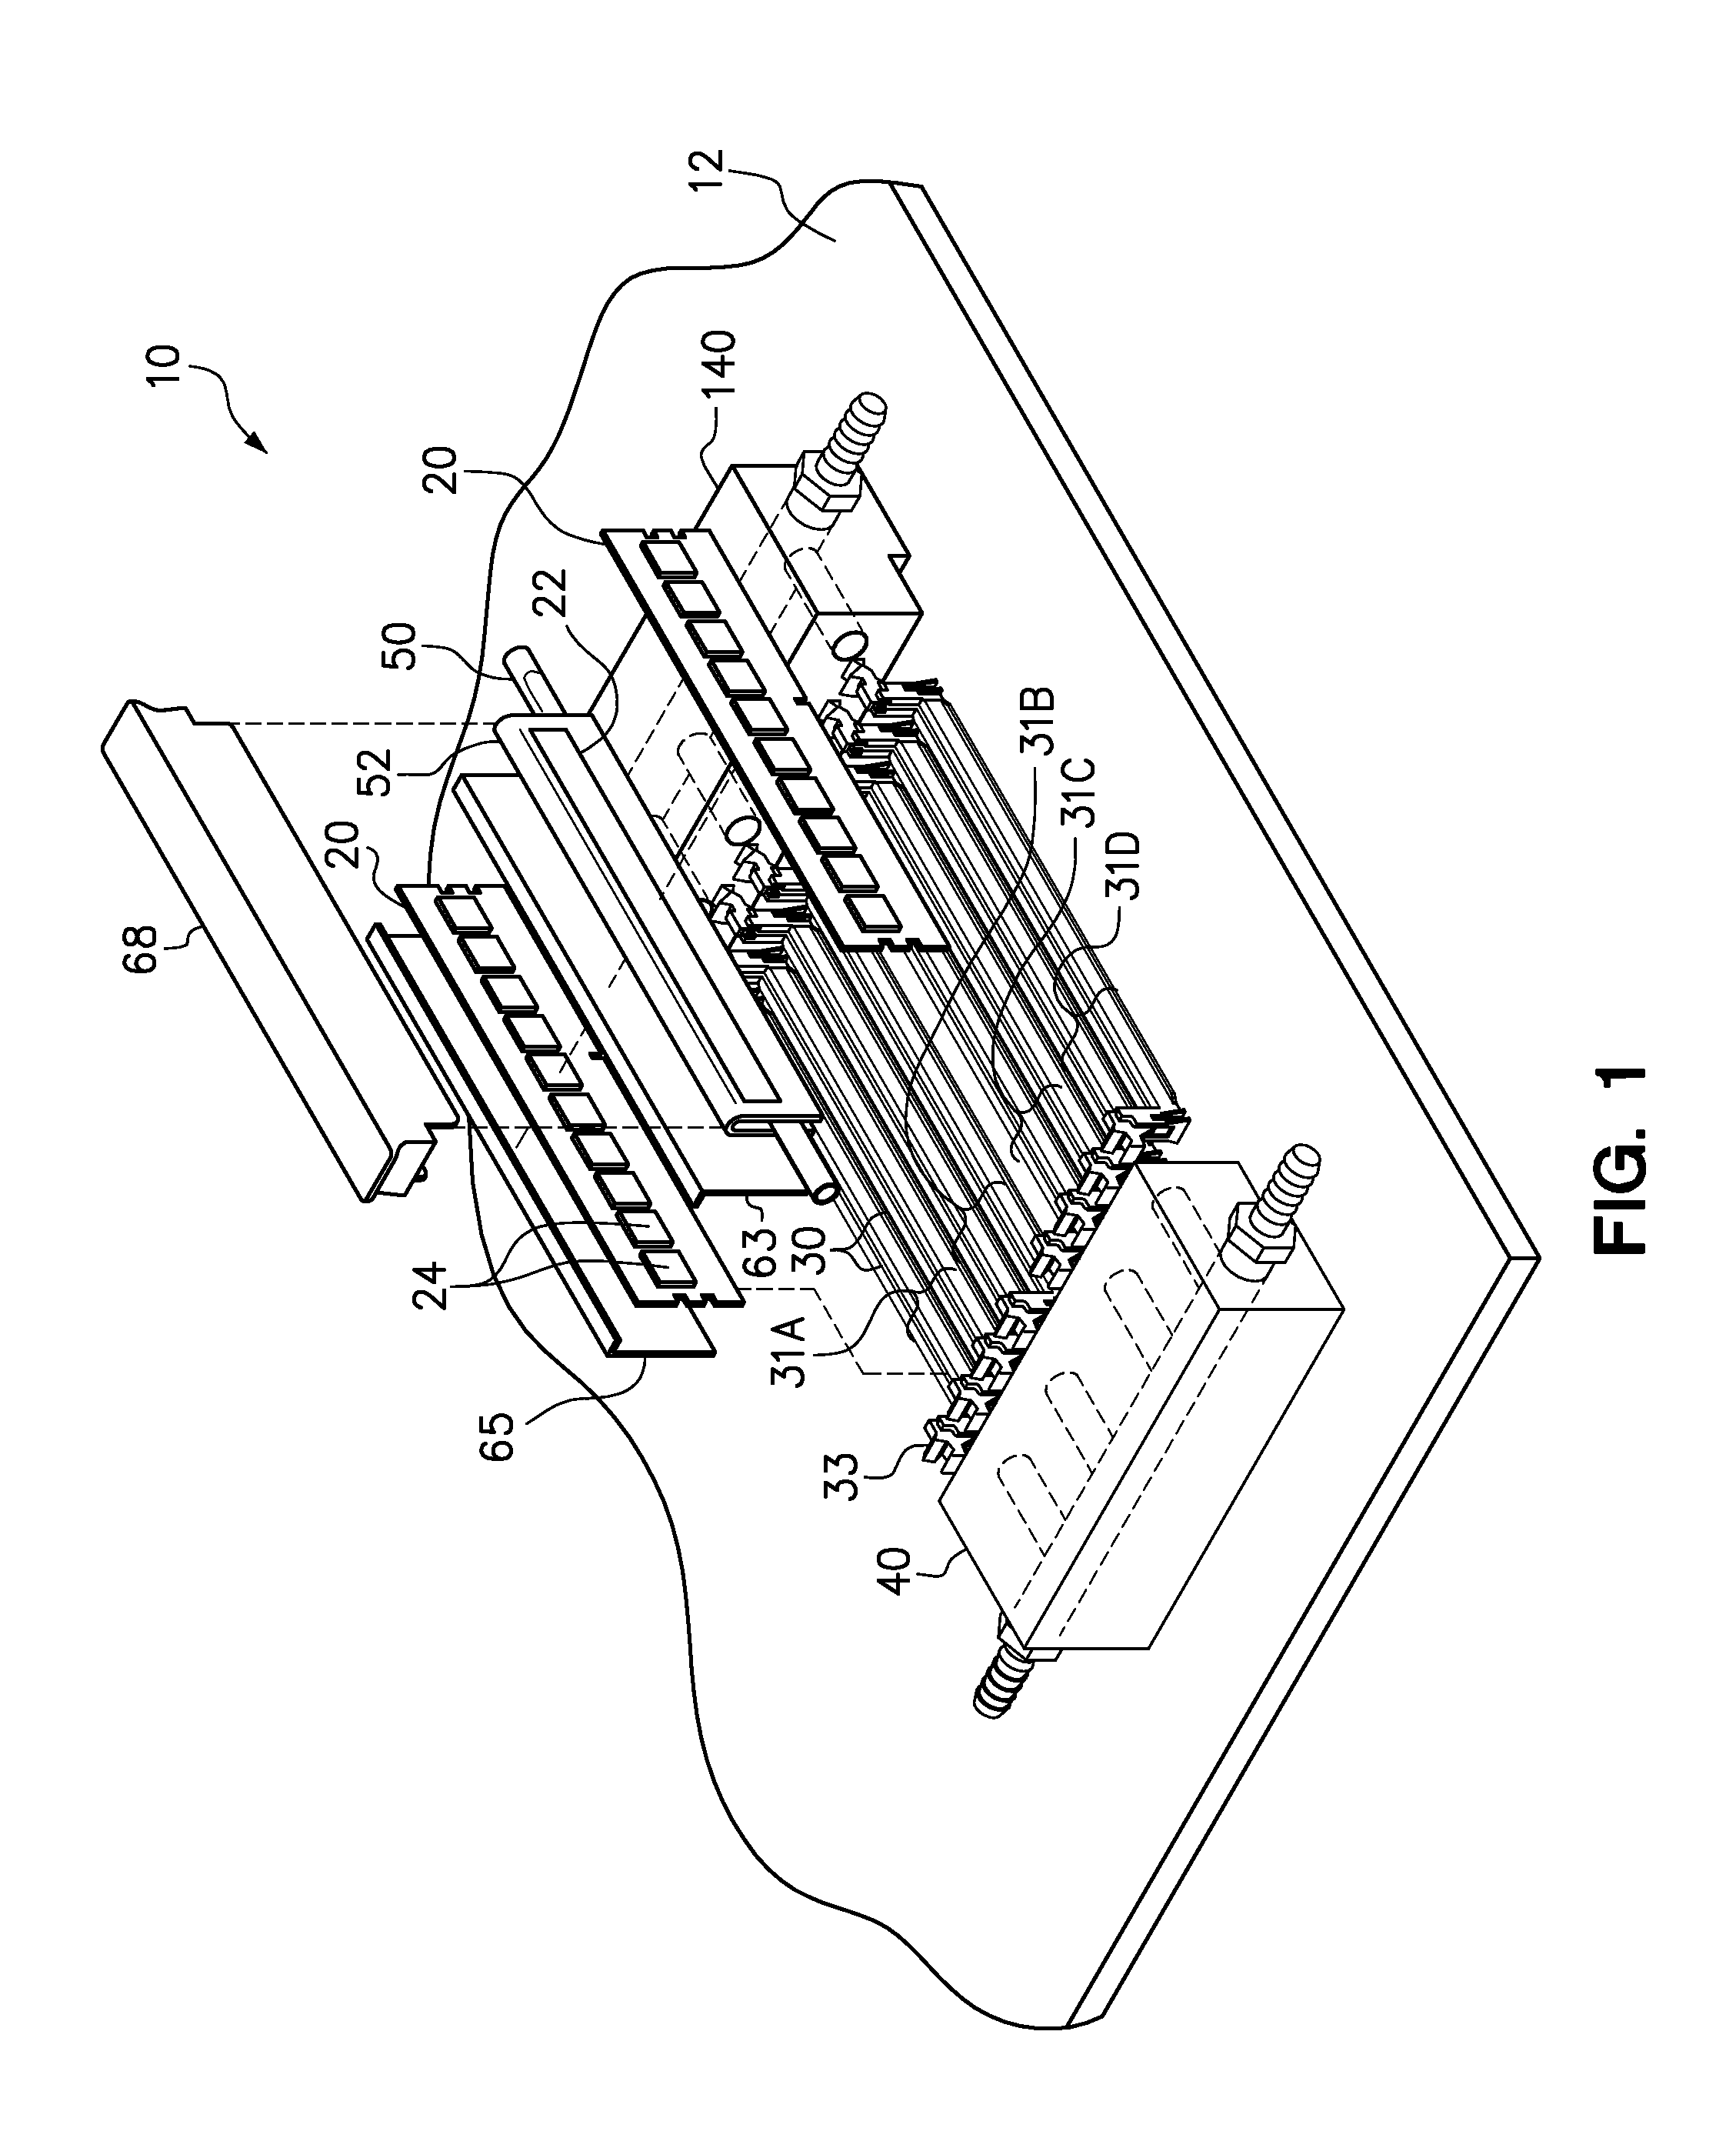 Liquid-cooled memory system having one cooling pipe per pair of dimms